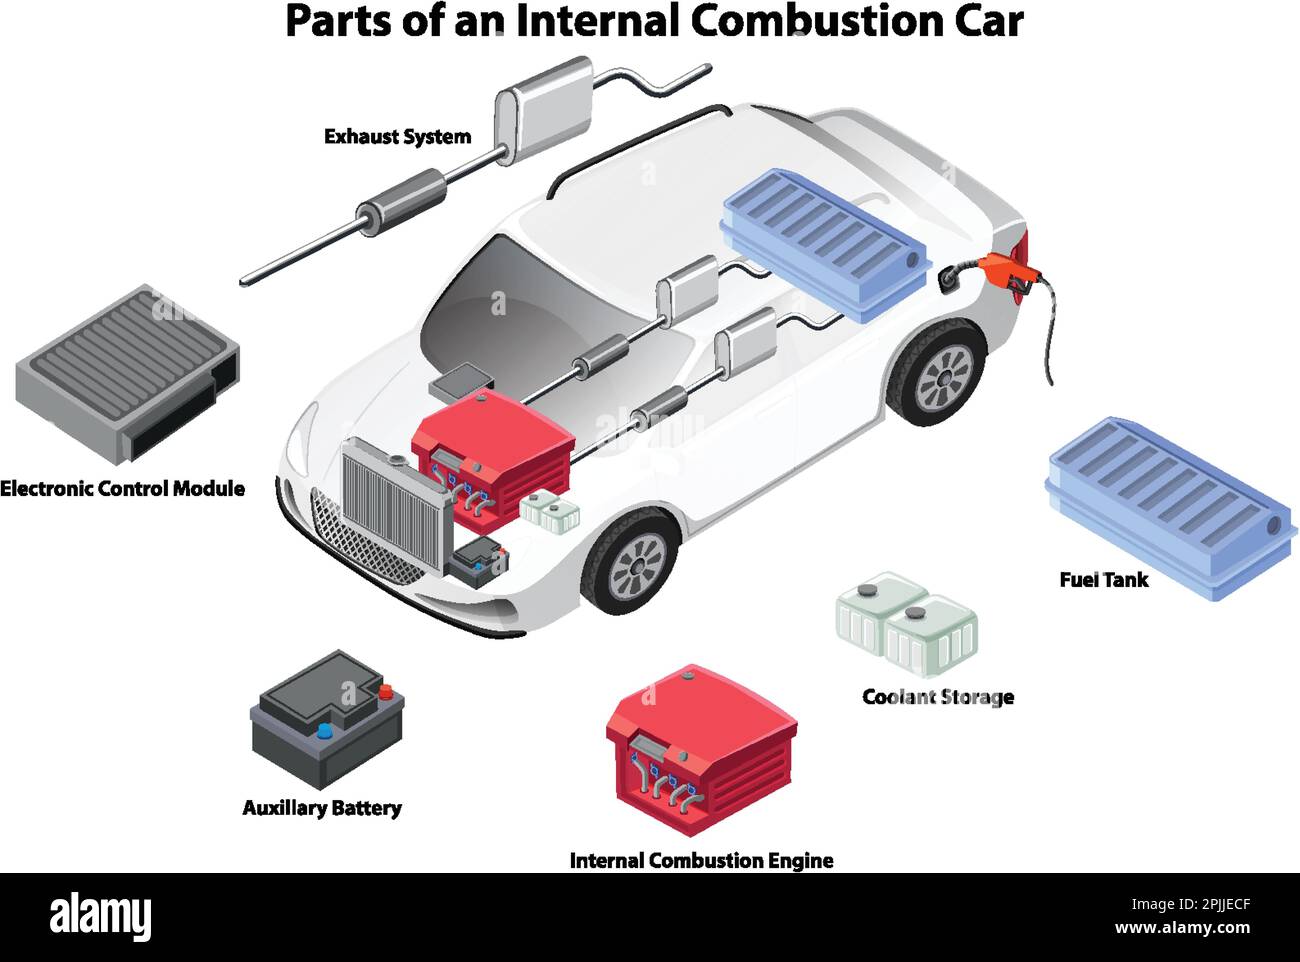 Parts of an Internal Combustion Car illustration Stock Vector